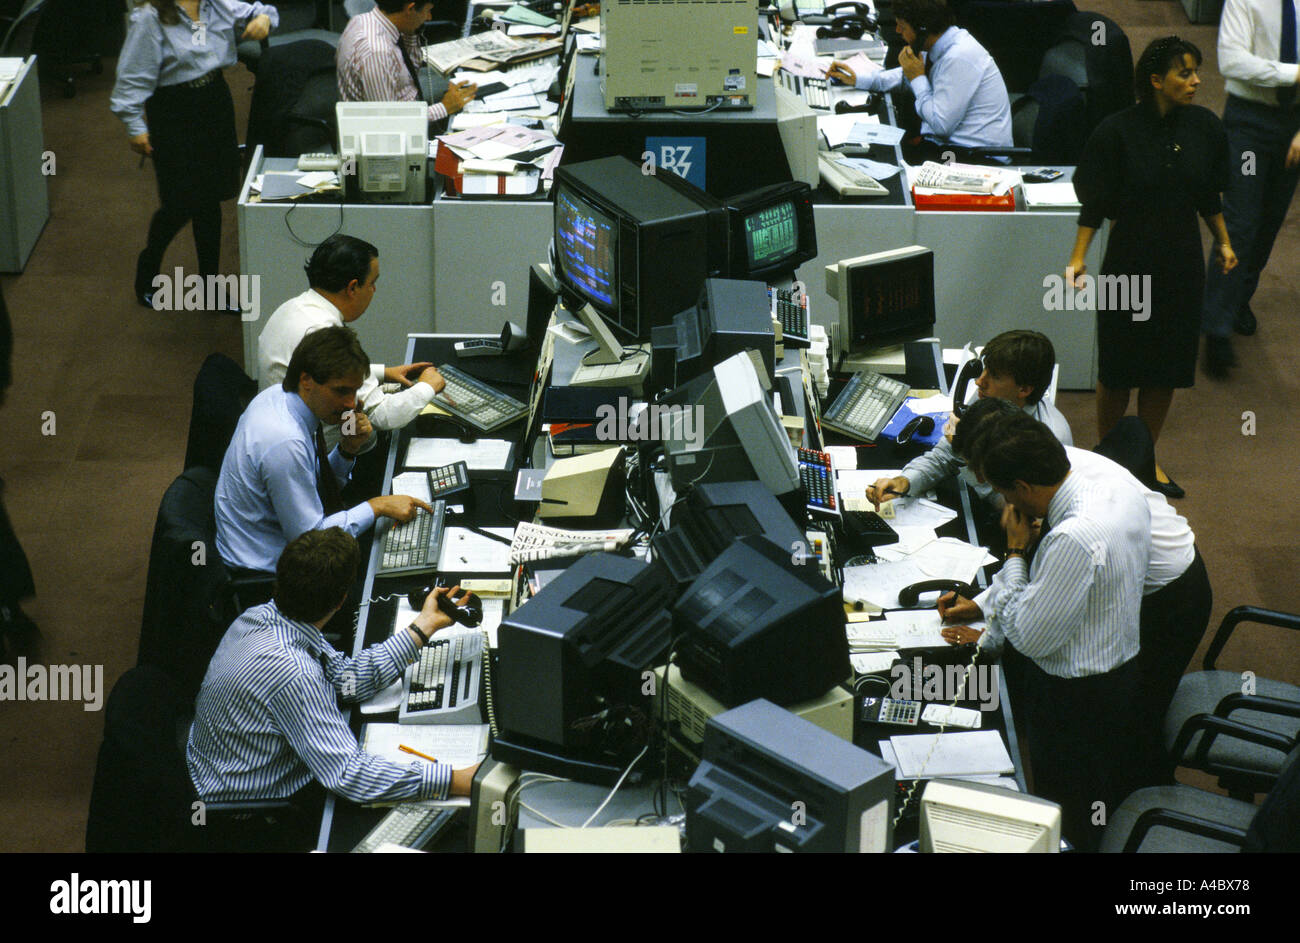 brokers in dealing room at the barclays de zoete wedd investment management in london on 17 oct 1987 stock market crash Stock Photo